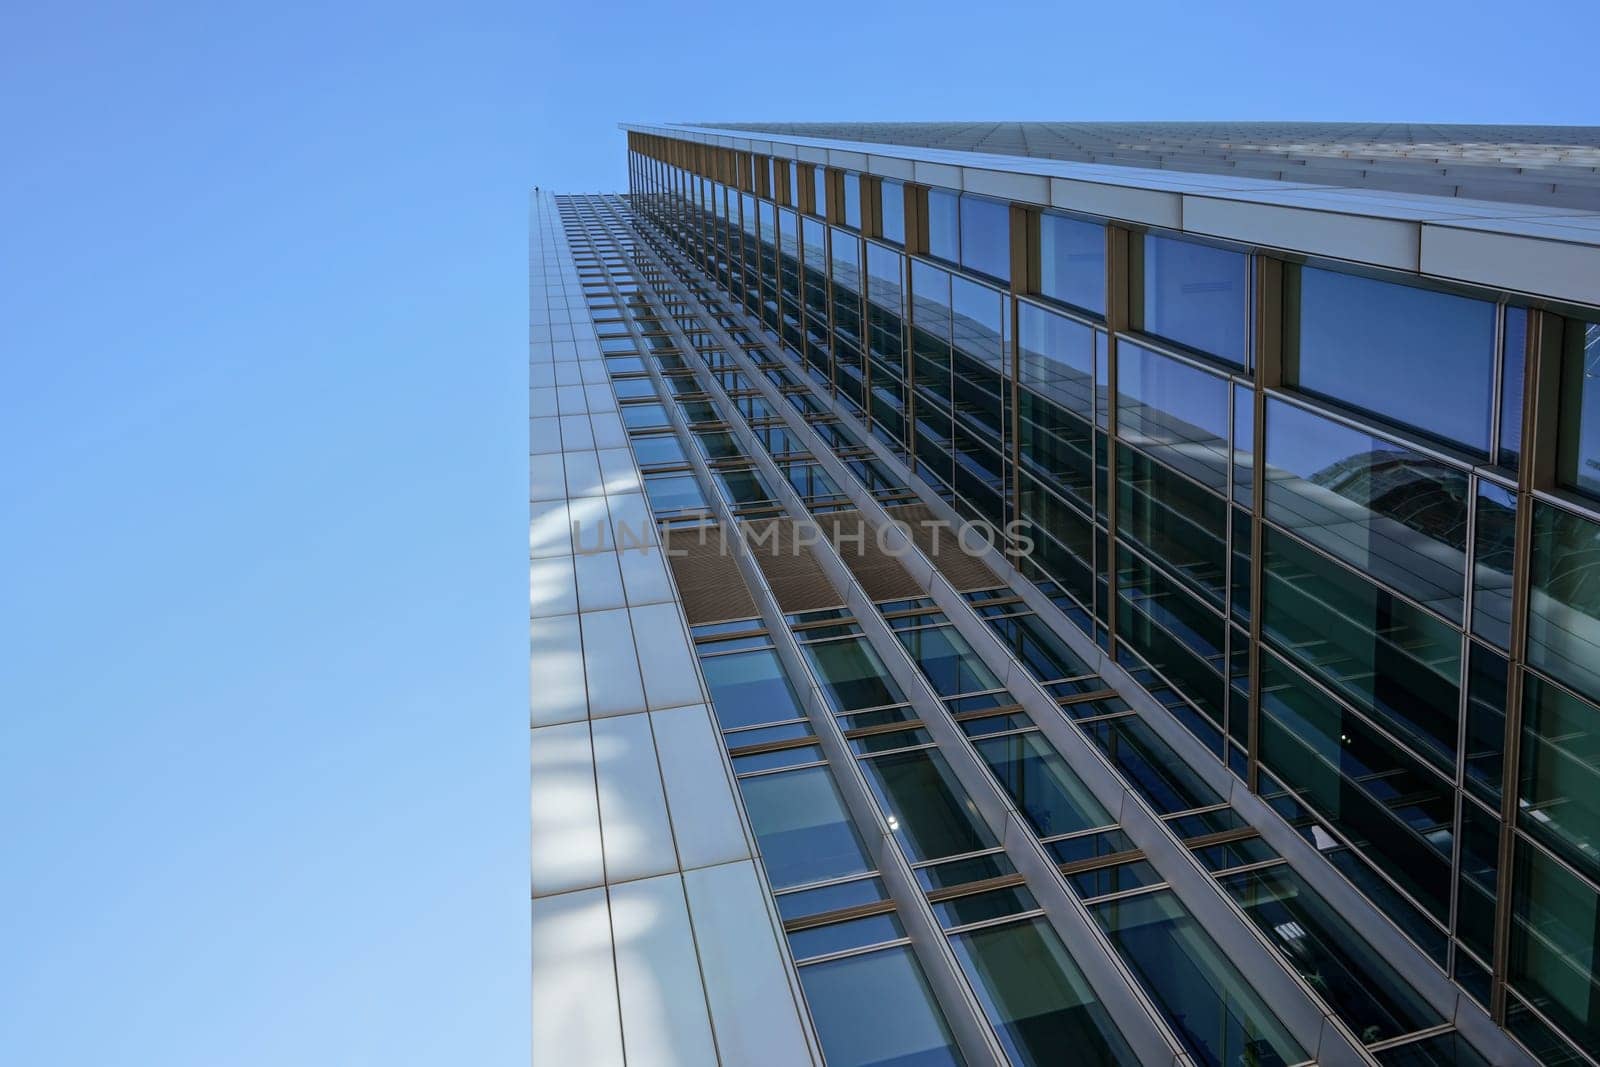 London, United Kingdom - February 03, 2019: Looking up glass and steel "10 Upper Bank Street" skyscraper at Canary Wharf. It's one of tallest buildings in UK capital, designed by Kohn Pendersen Fox